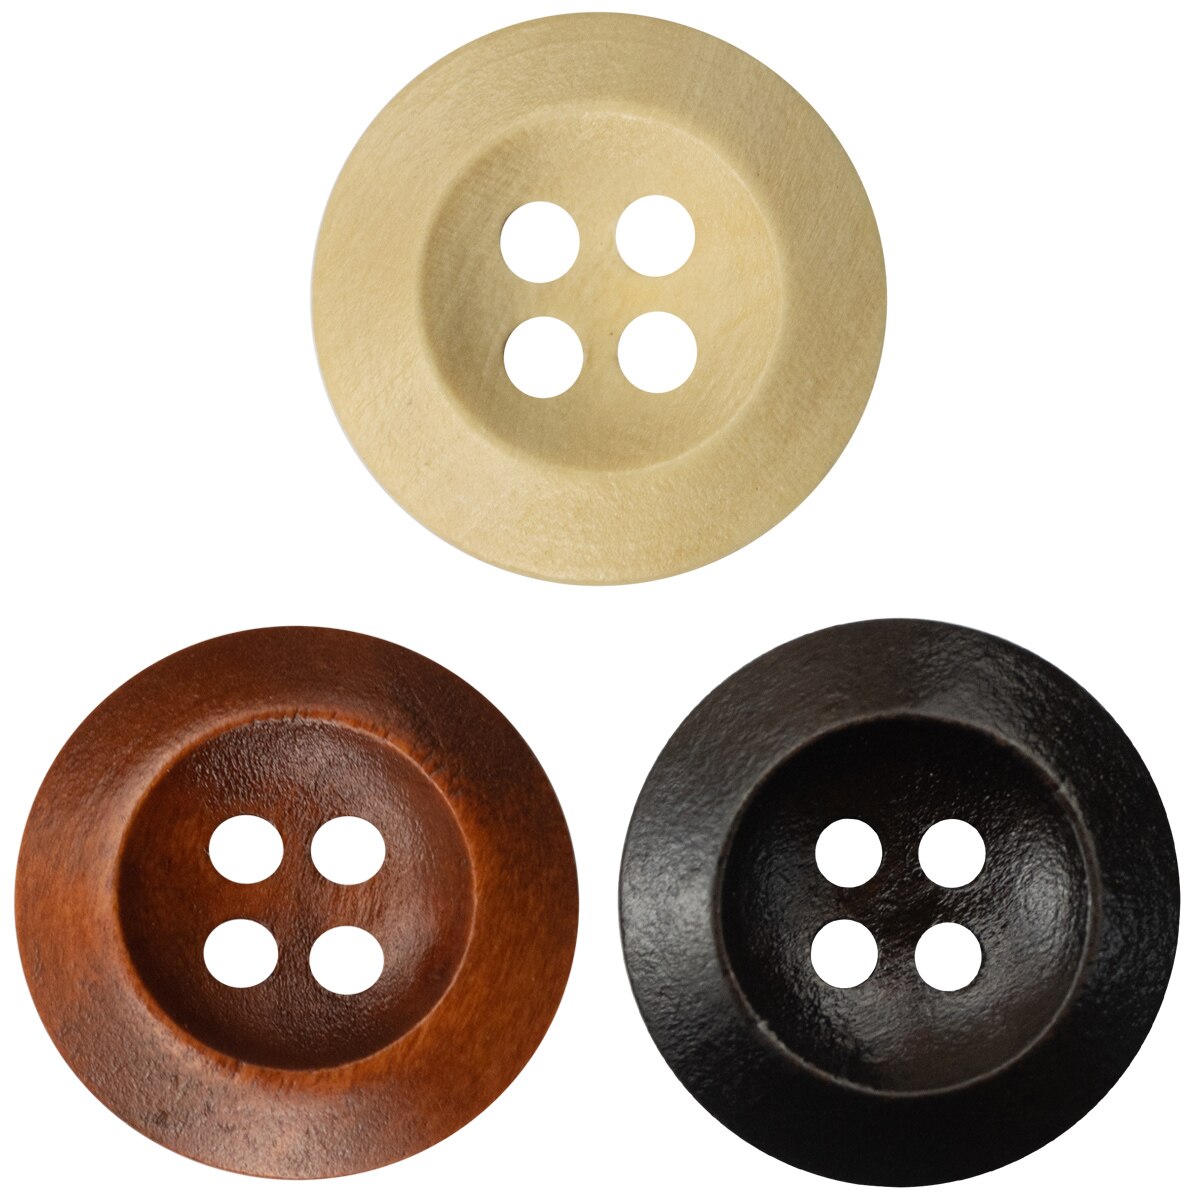 10pcs/lot Wooden Buttons for Crafts and Clothing With Curved Rim Natural Sewing Accessories